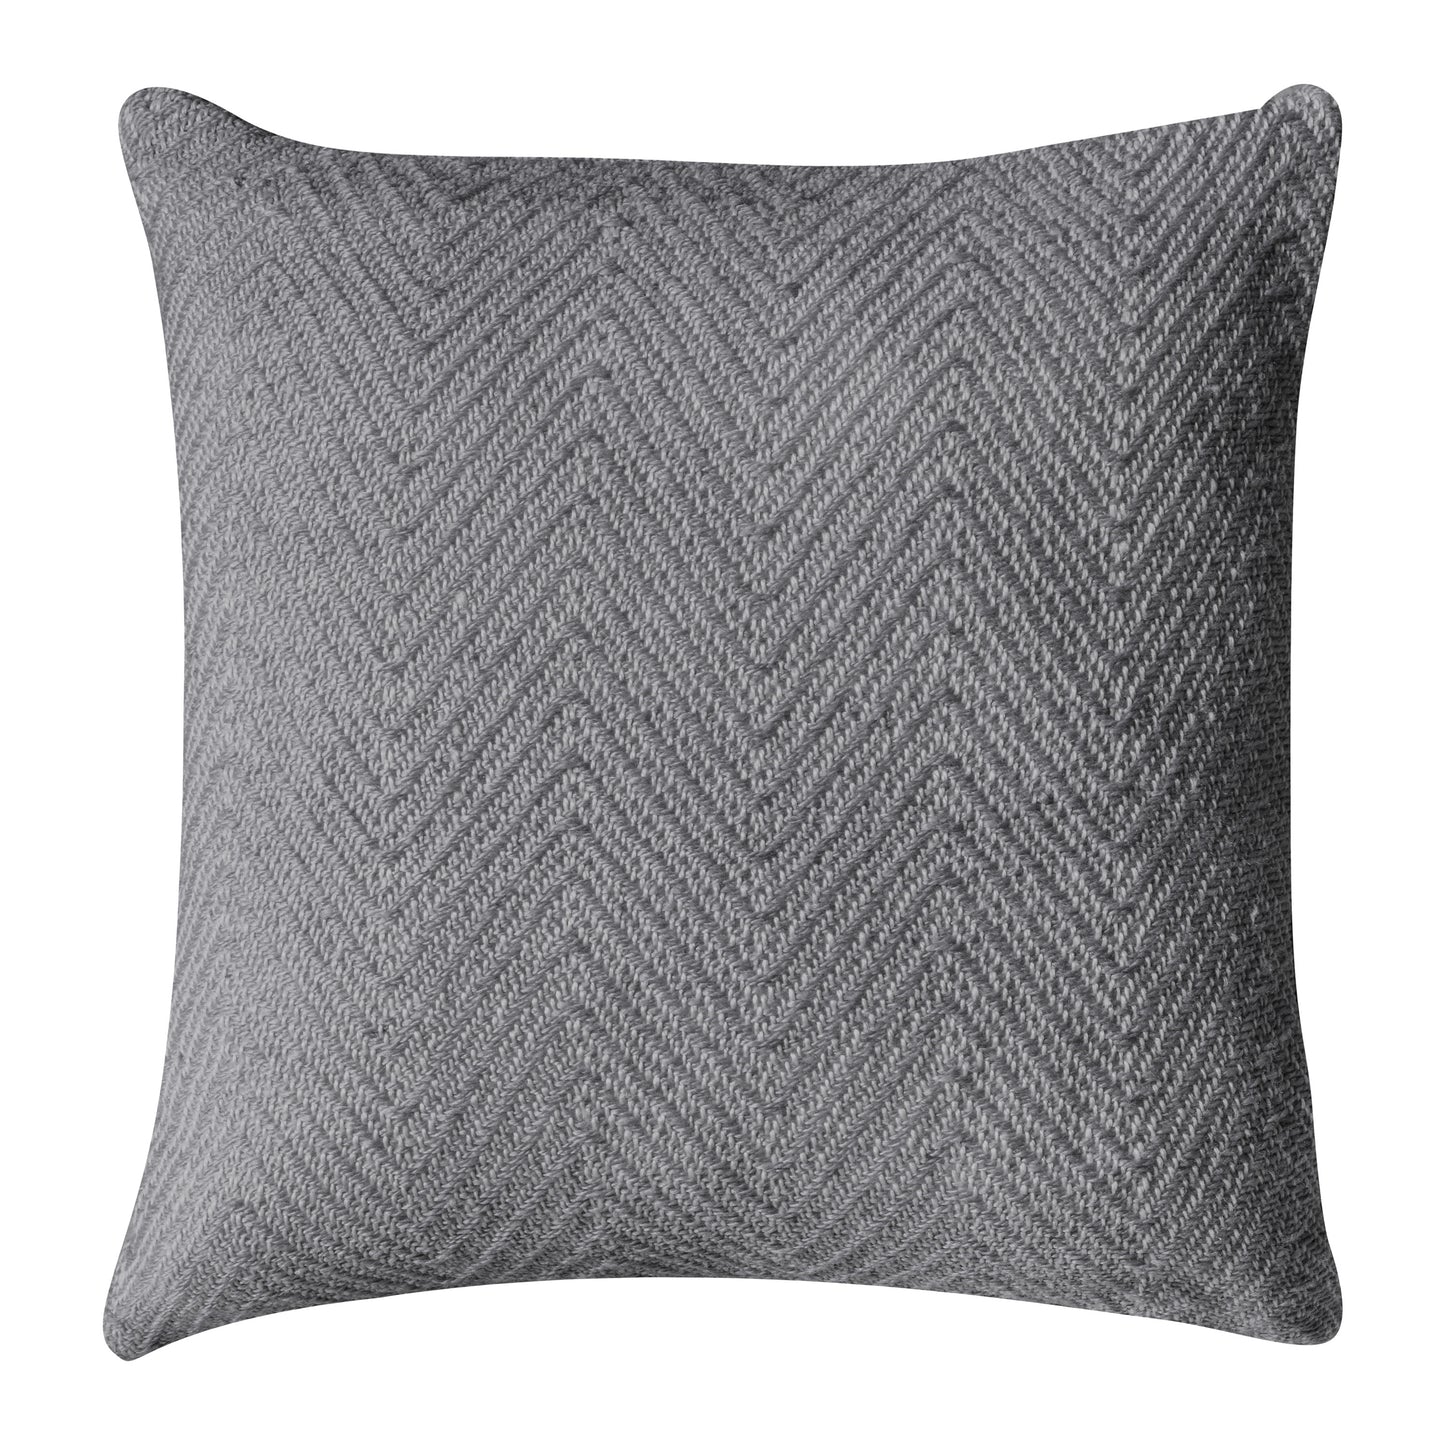 A Chevron Cushion Grey 450x450mm with a chevron pattern for home furniture and interior decor.